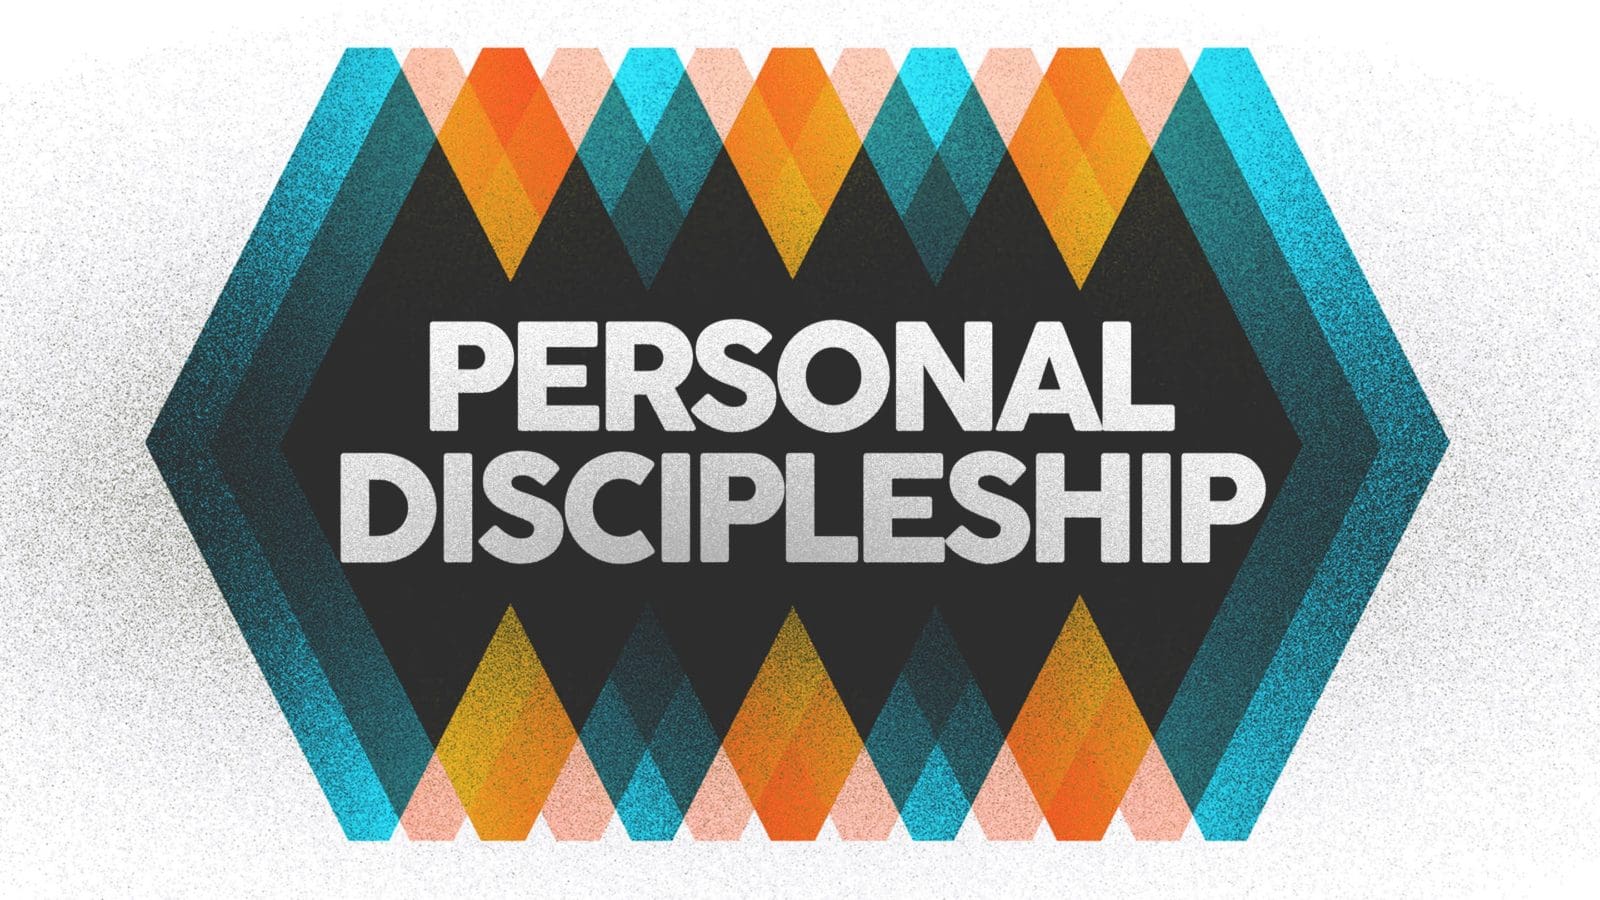 Discipleship in the Old Testament